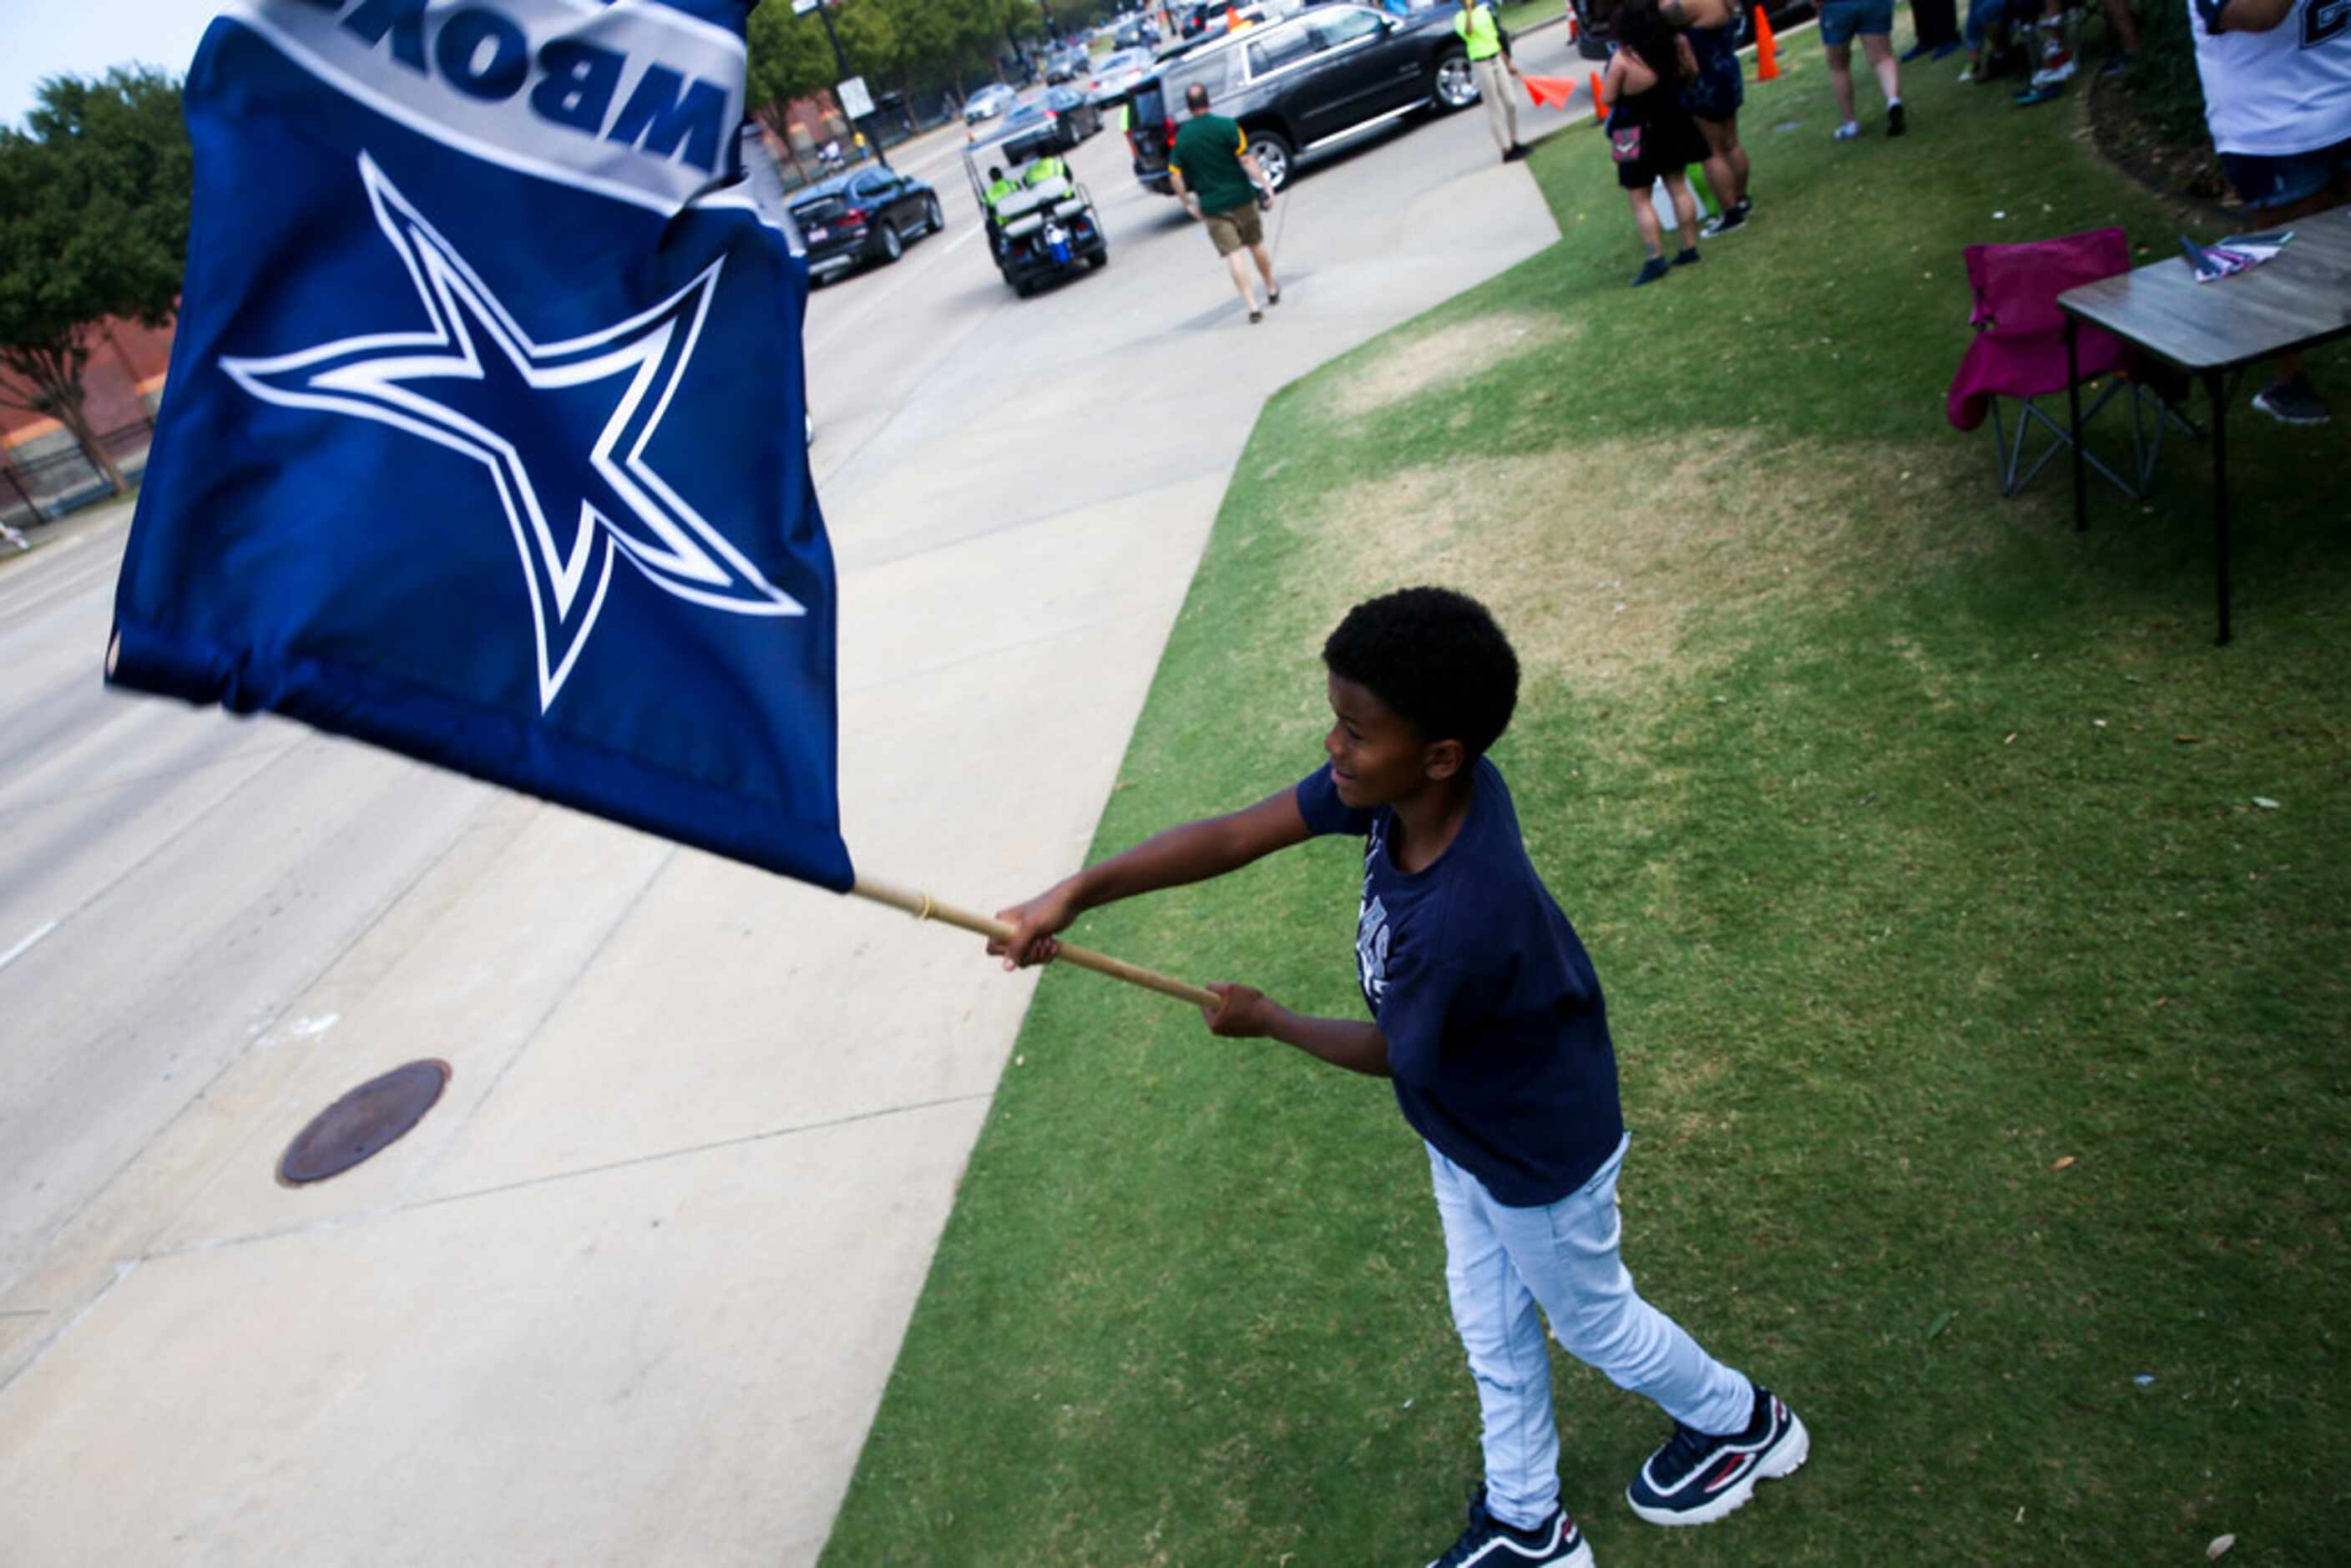 Chandler Robins, 12, waives his Dallas Cowboys flag in the parking lot before an NFL game...